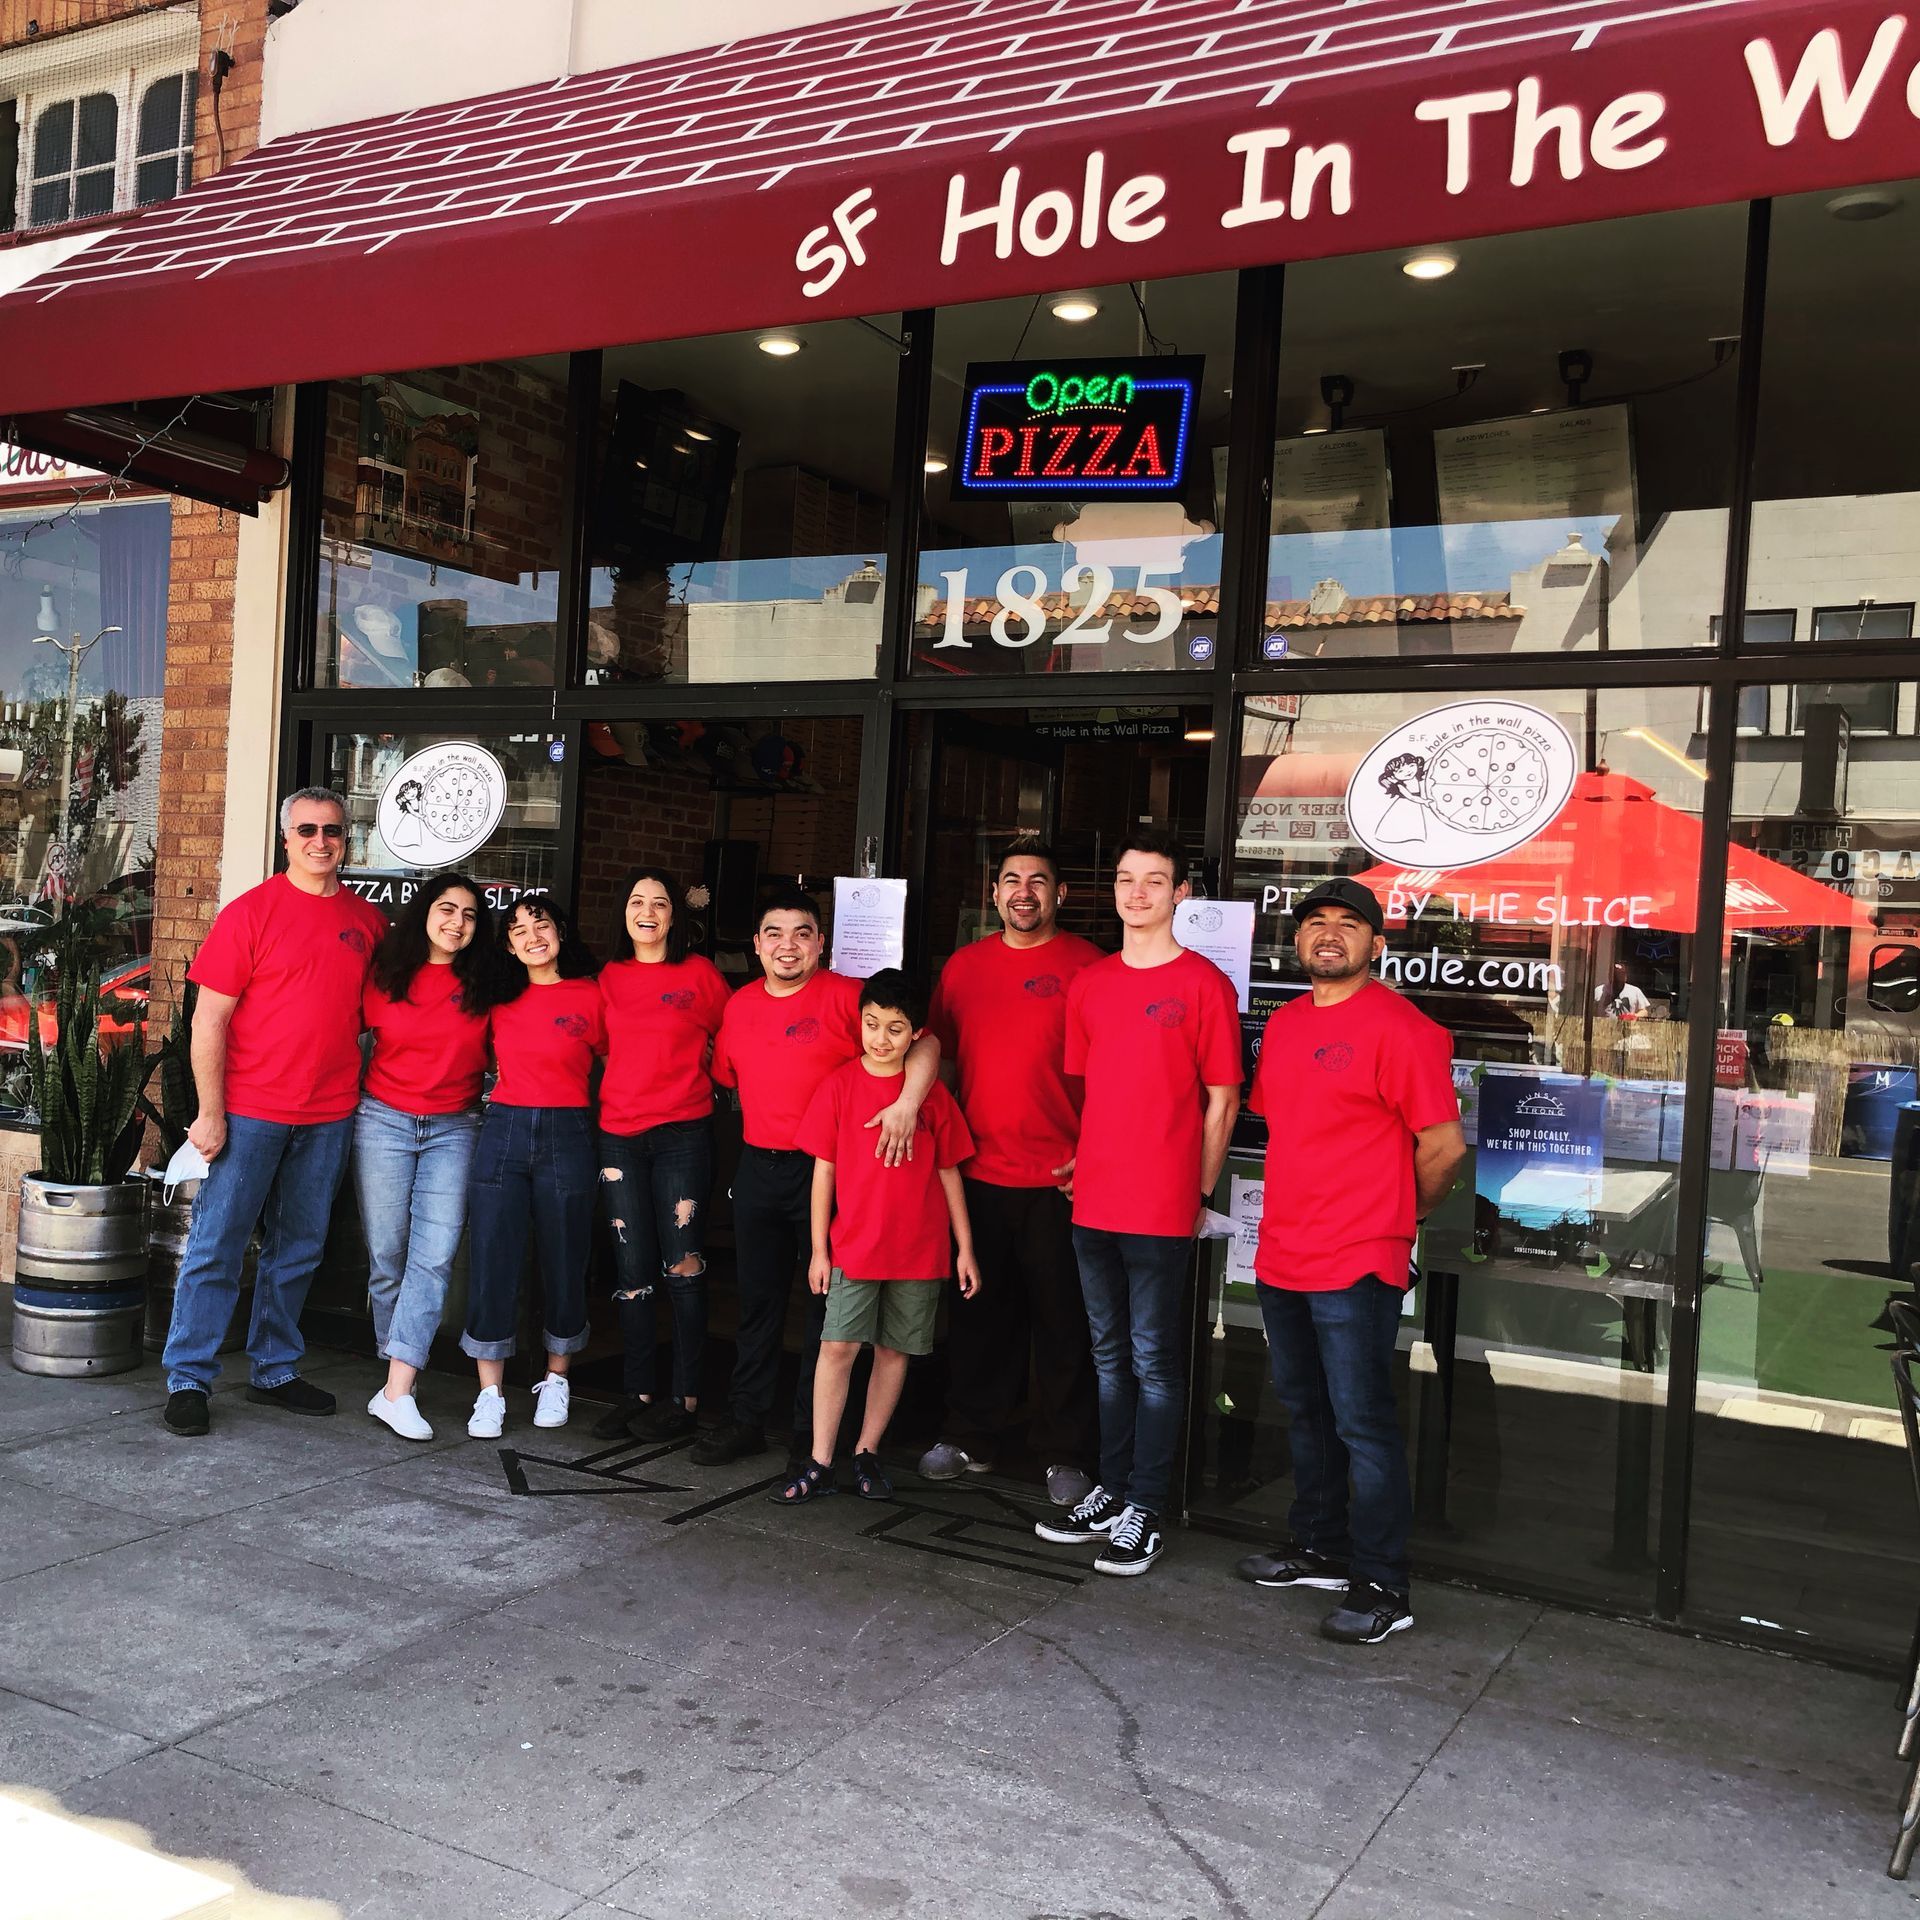 a group of people standing in front of a restaurant called hole in the wall